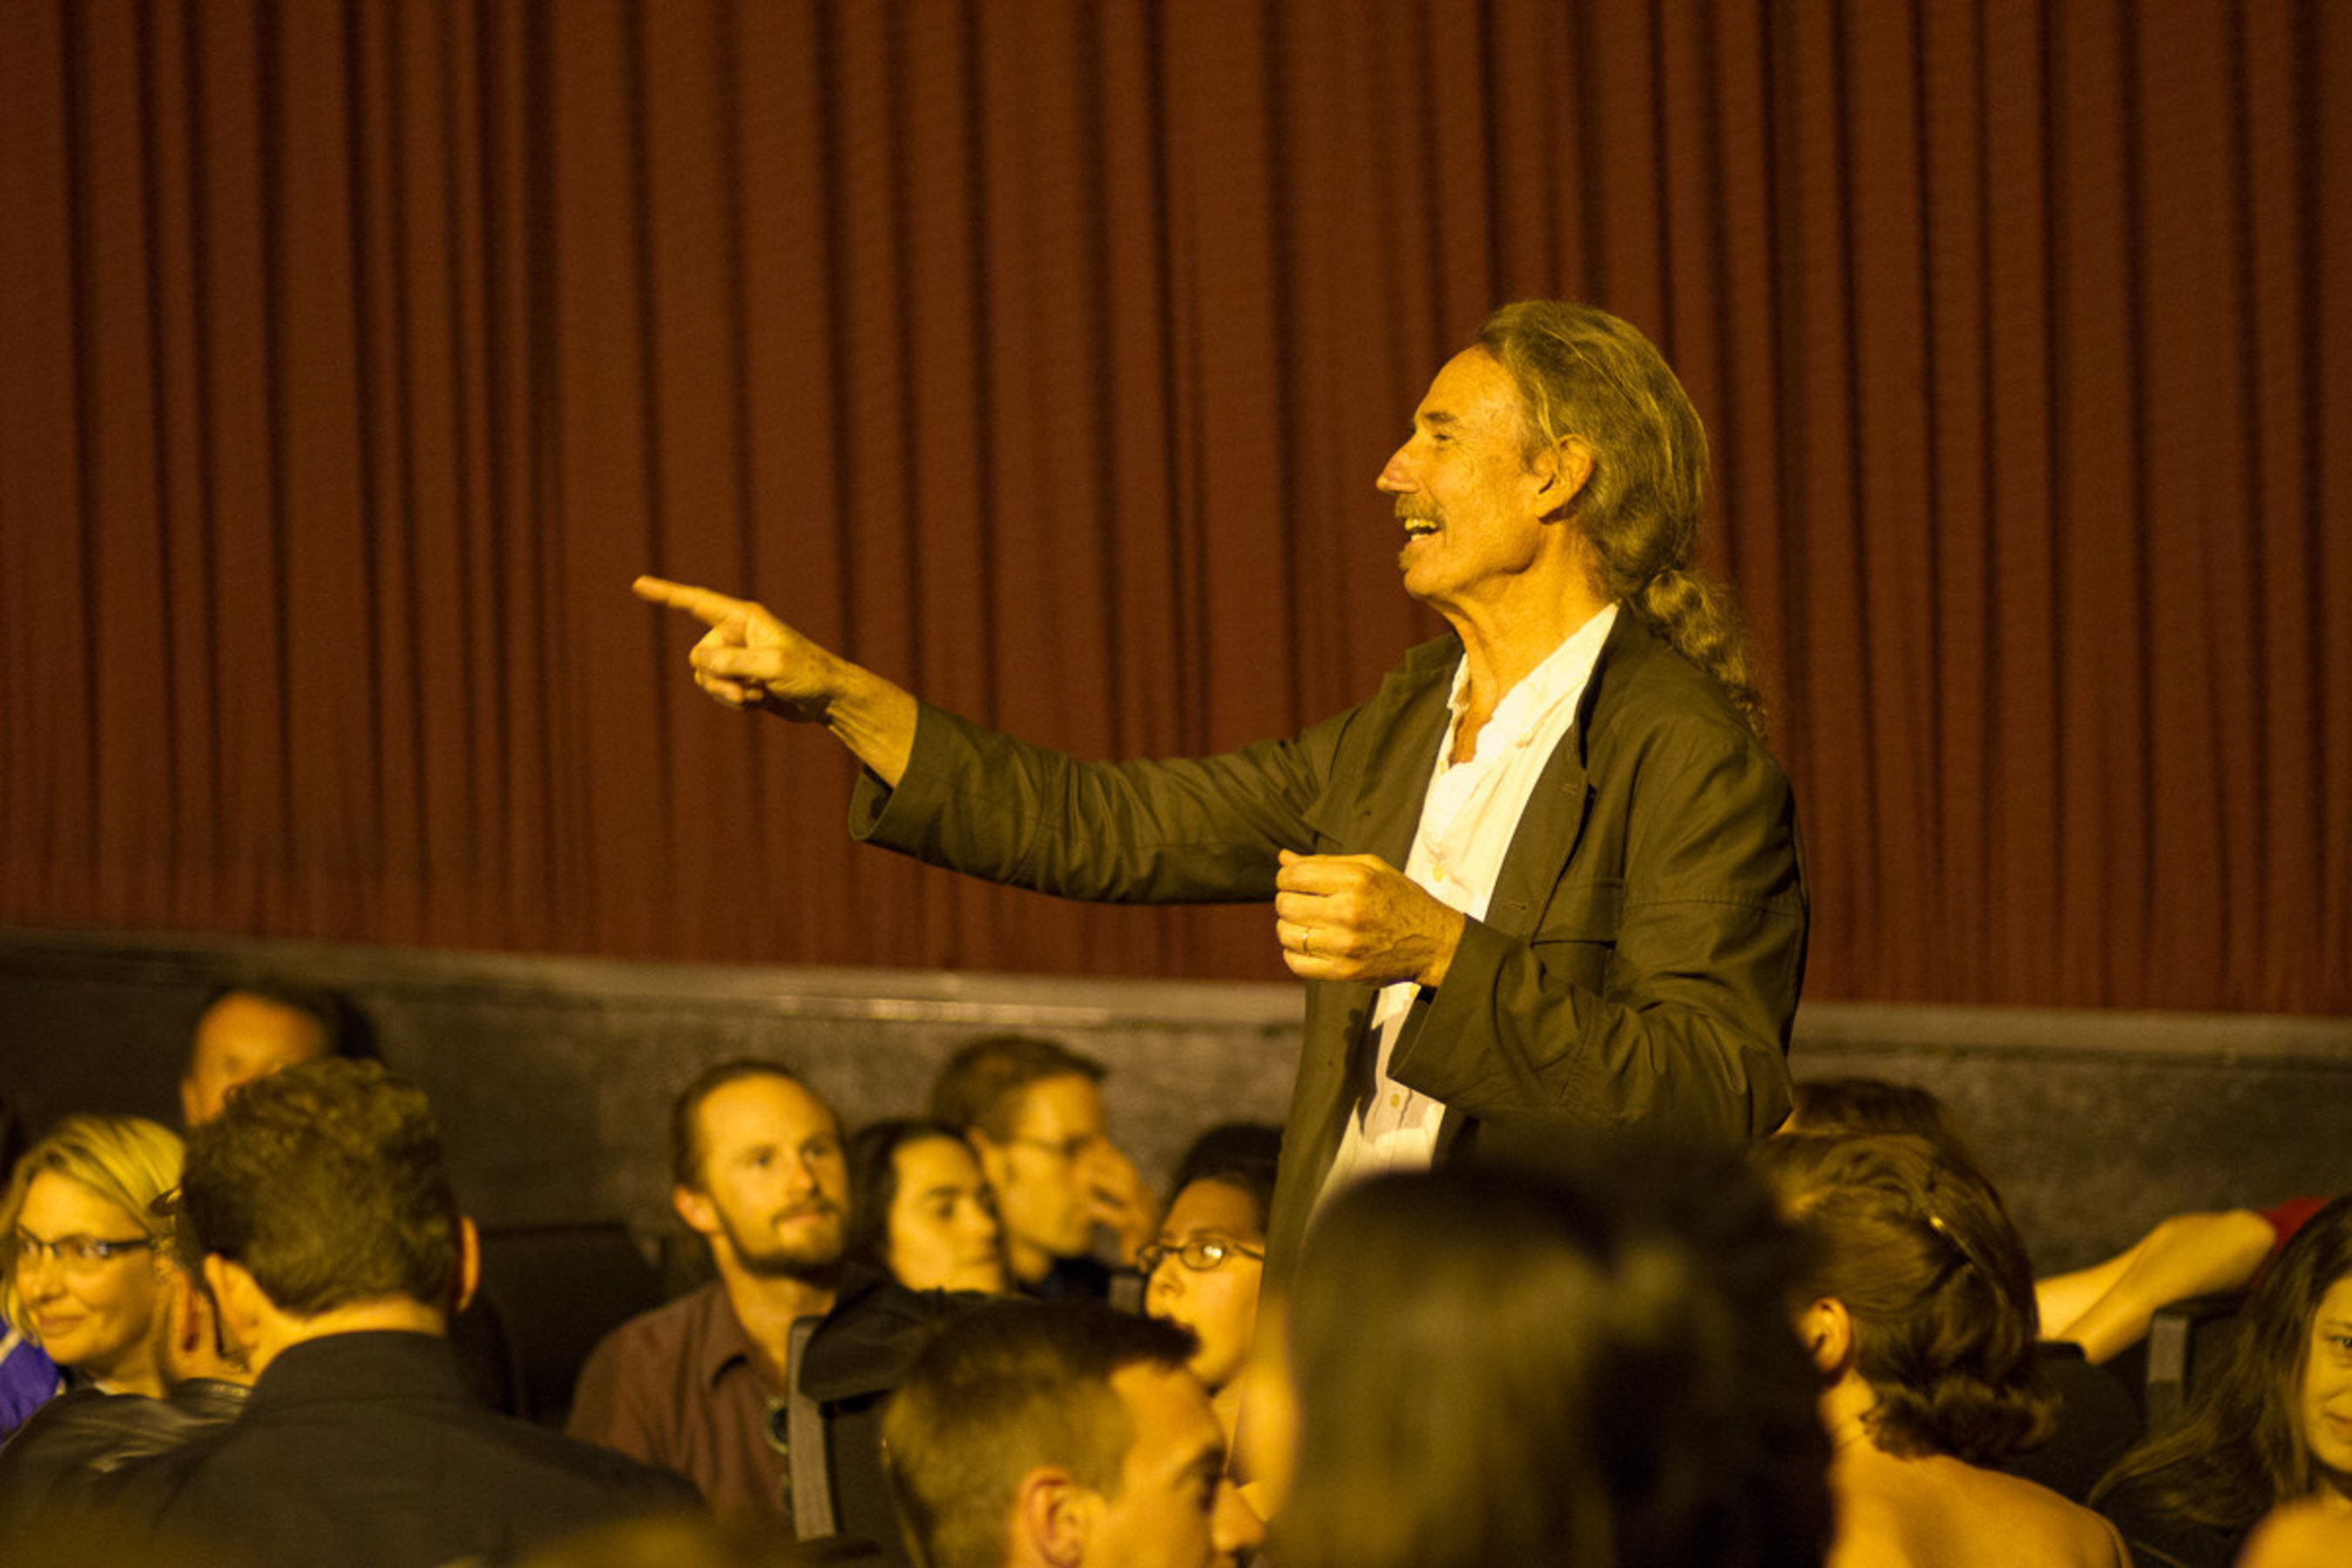 Occupy The Farm director and Veteran filmmaker Todd Darling at sold out Berkeley opening November 7, 2014.